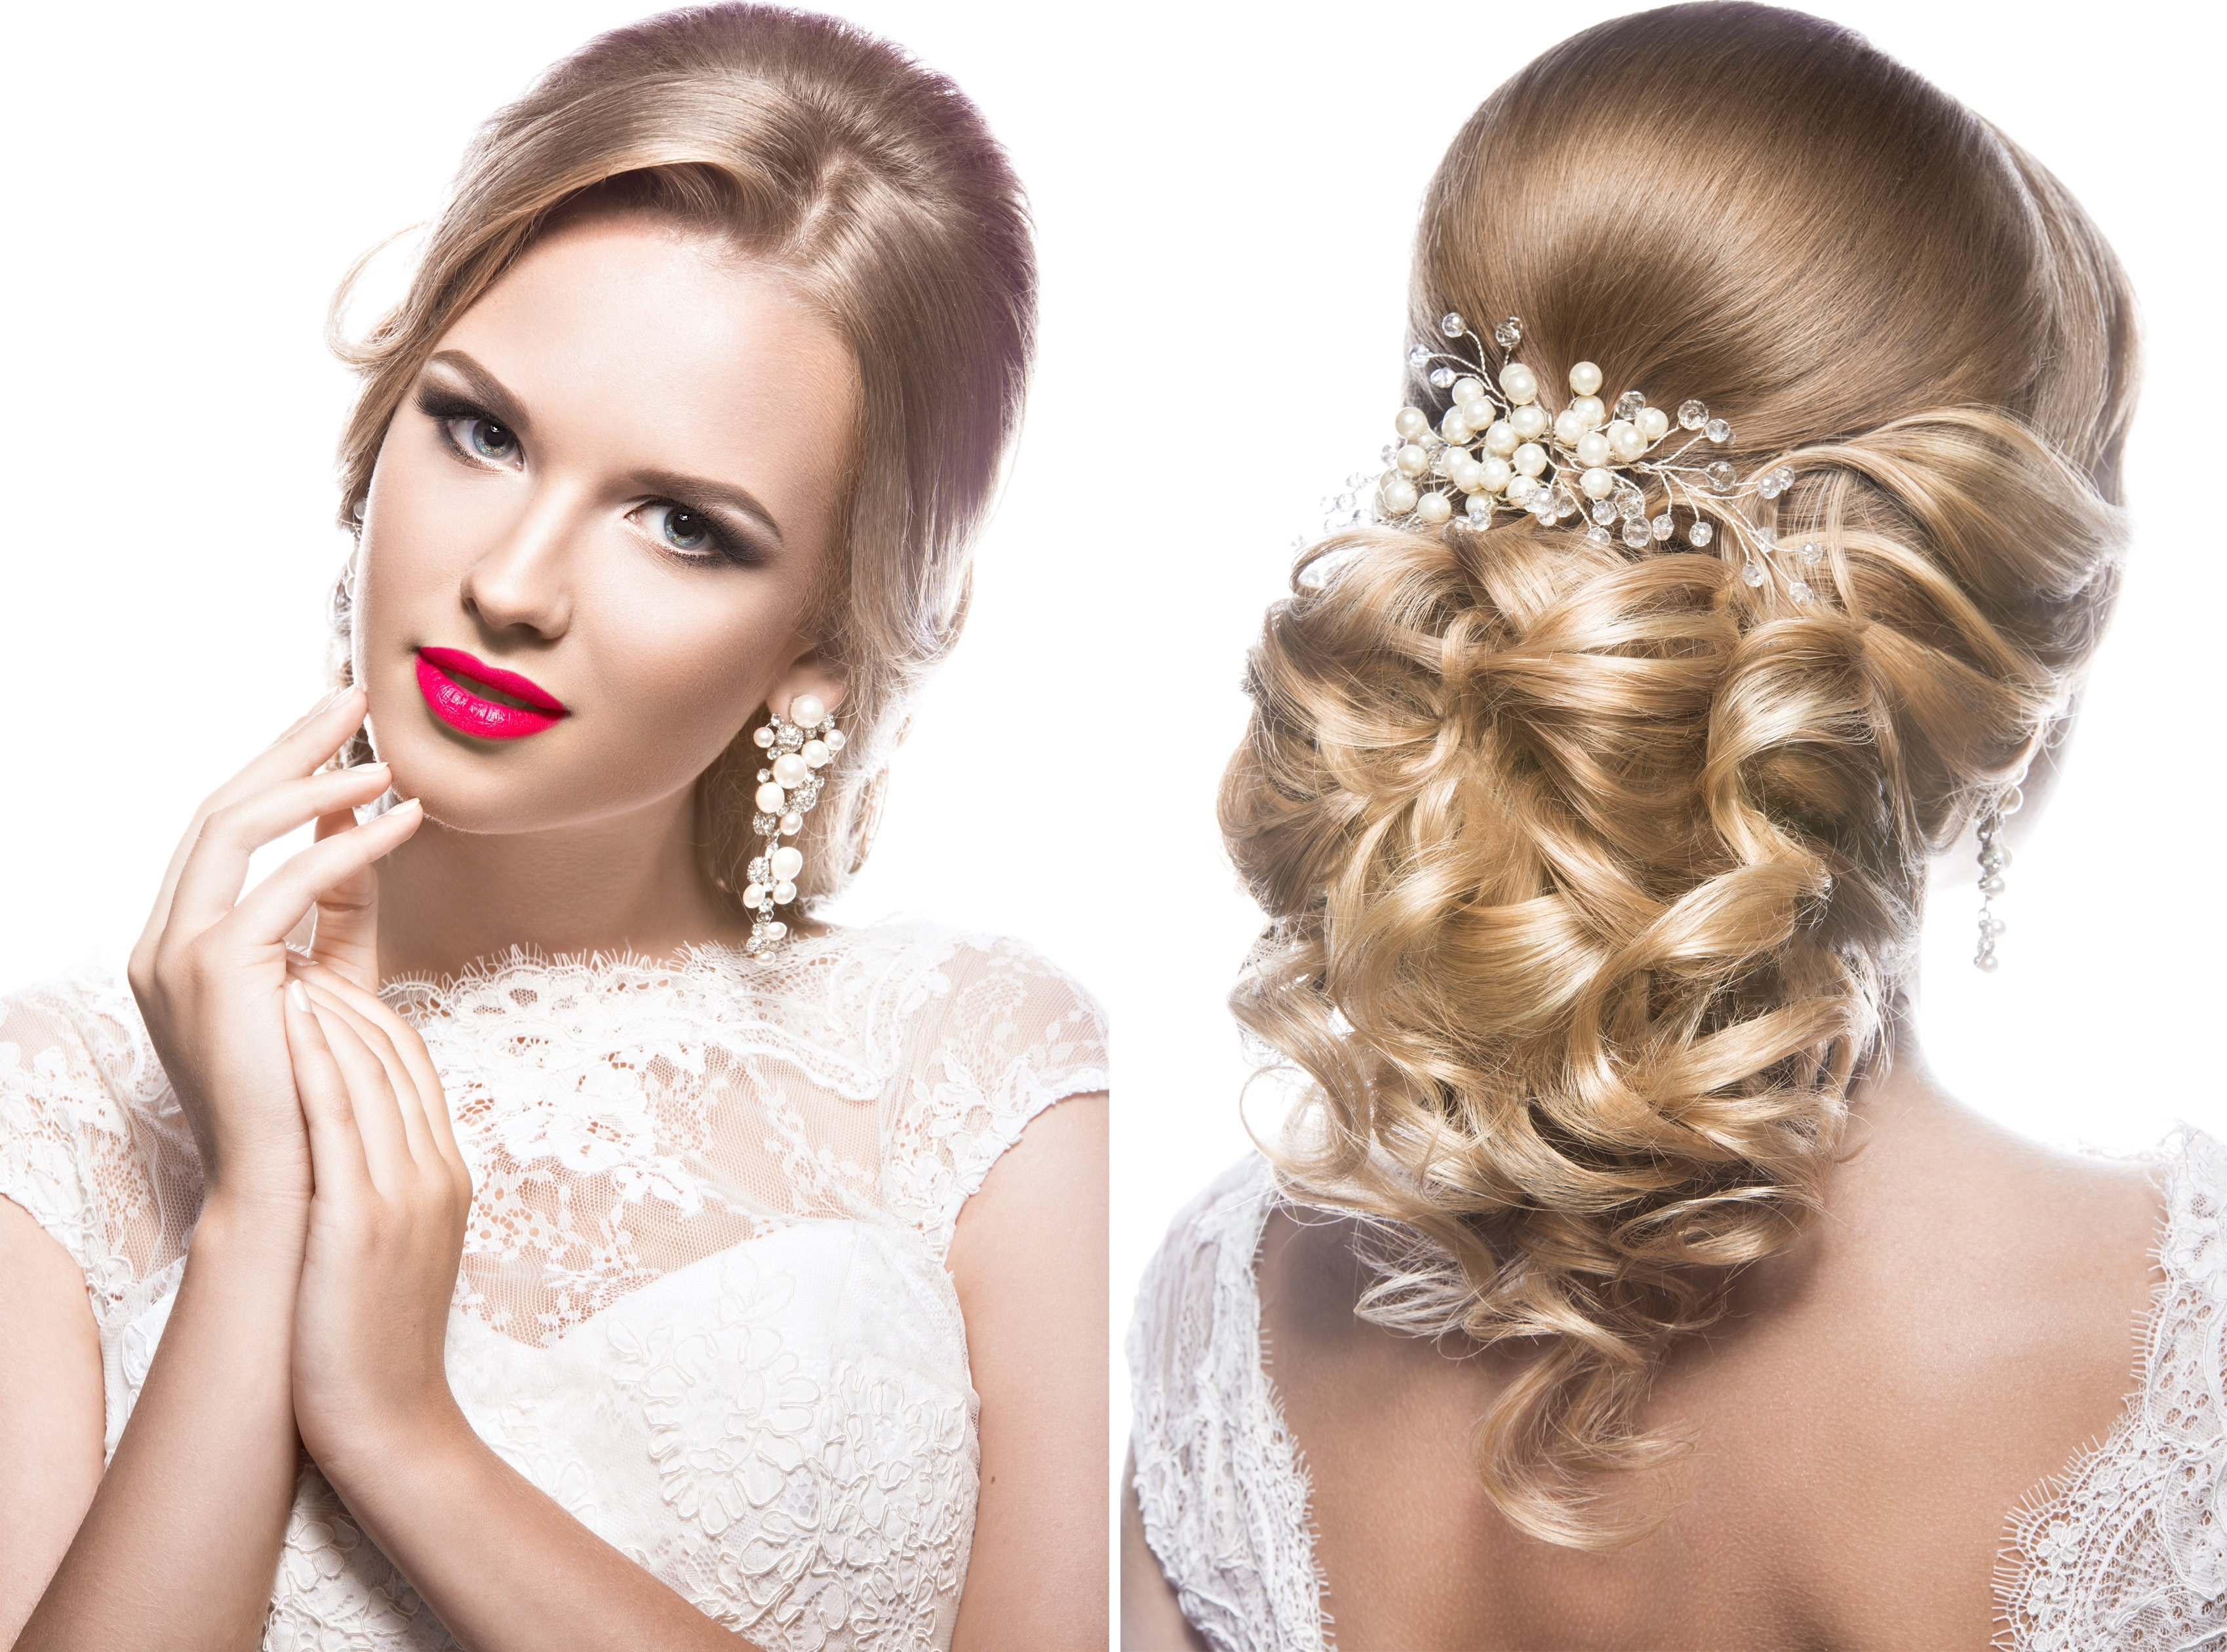 How To Get Beautiful Hair On Your Wedding Day With Hair within Wedding Hairstyles With Extensions